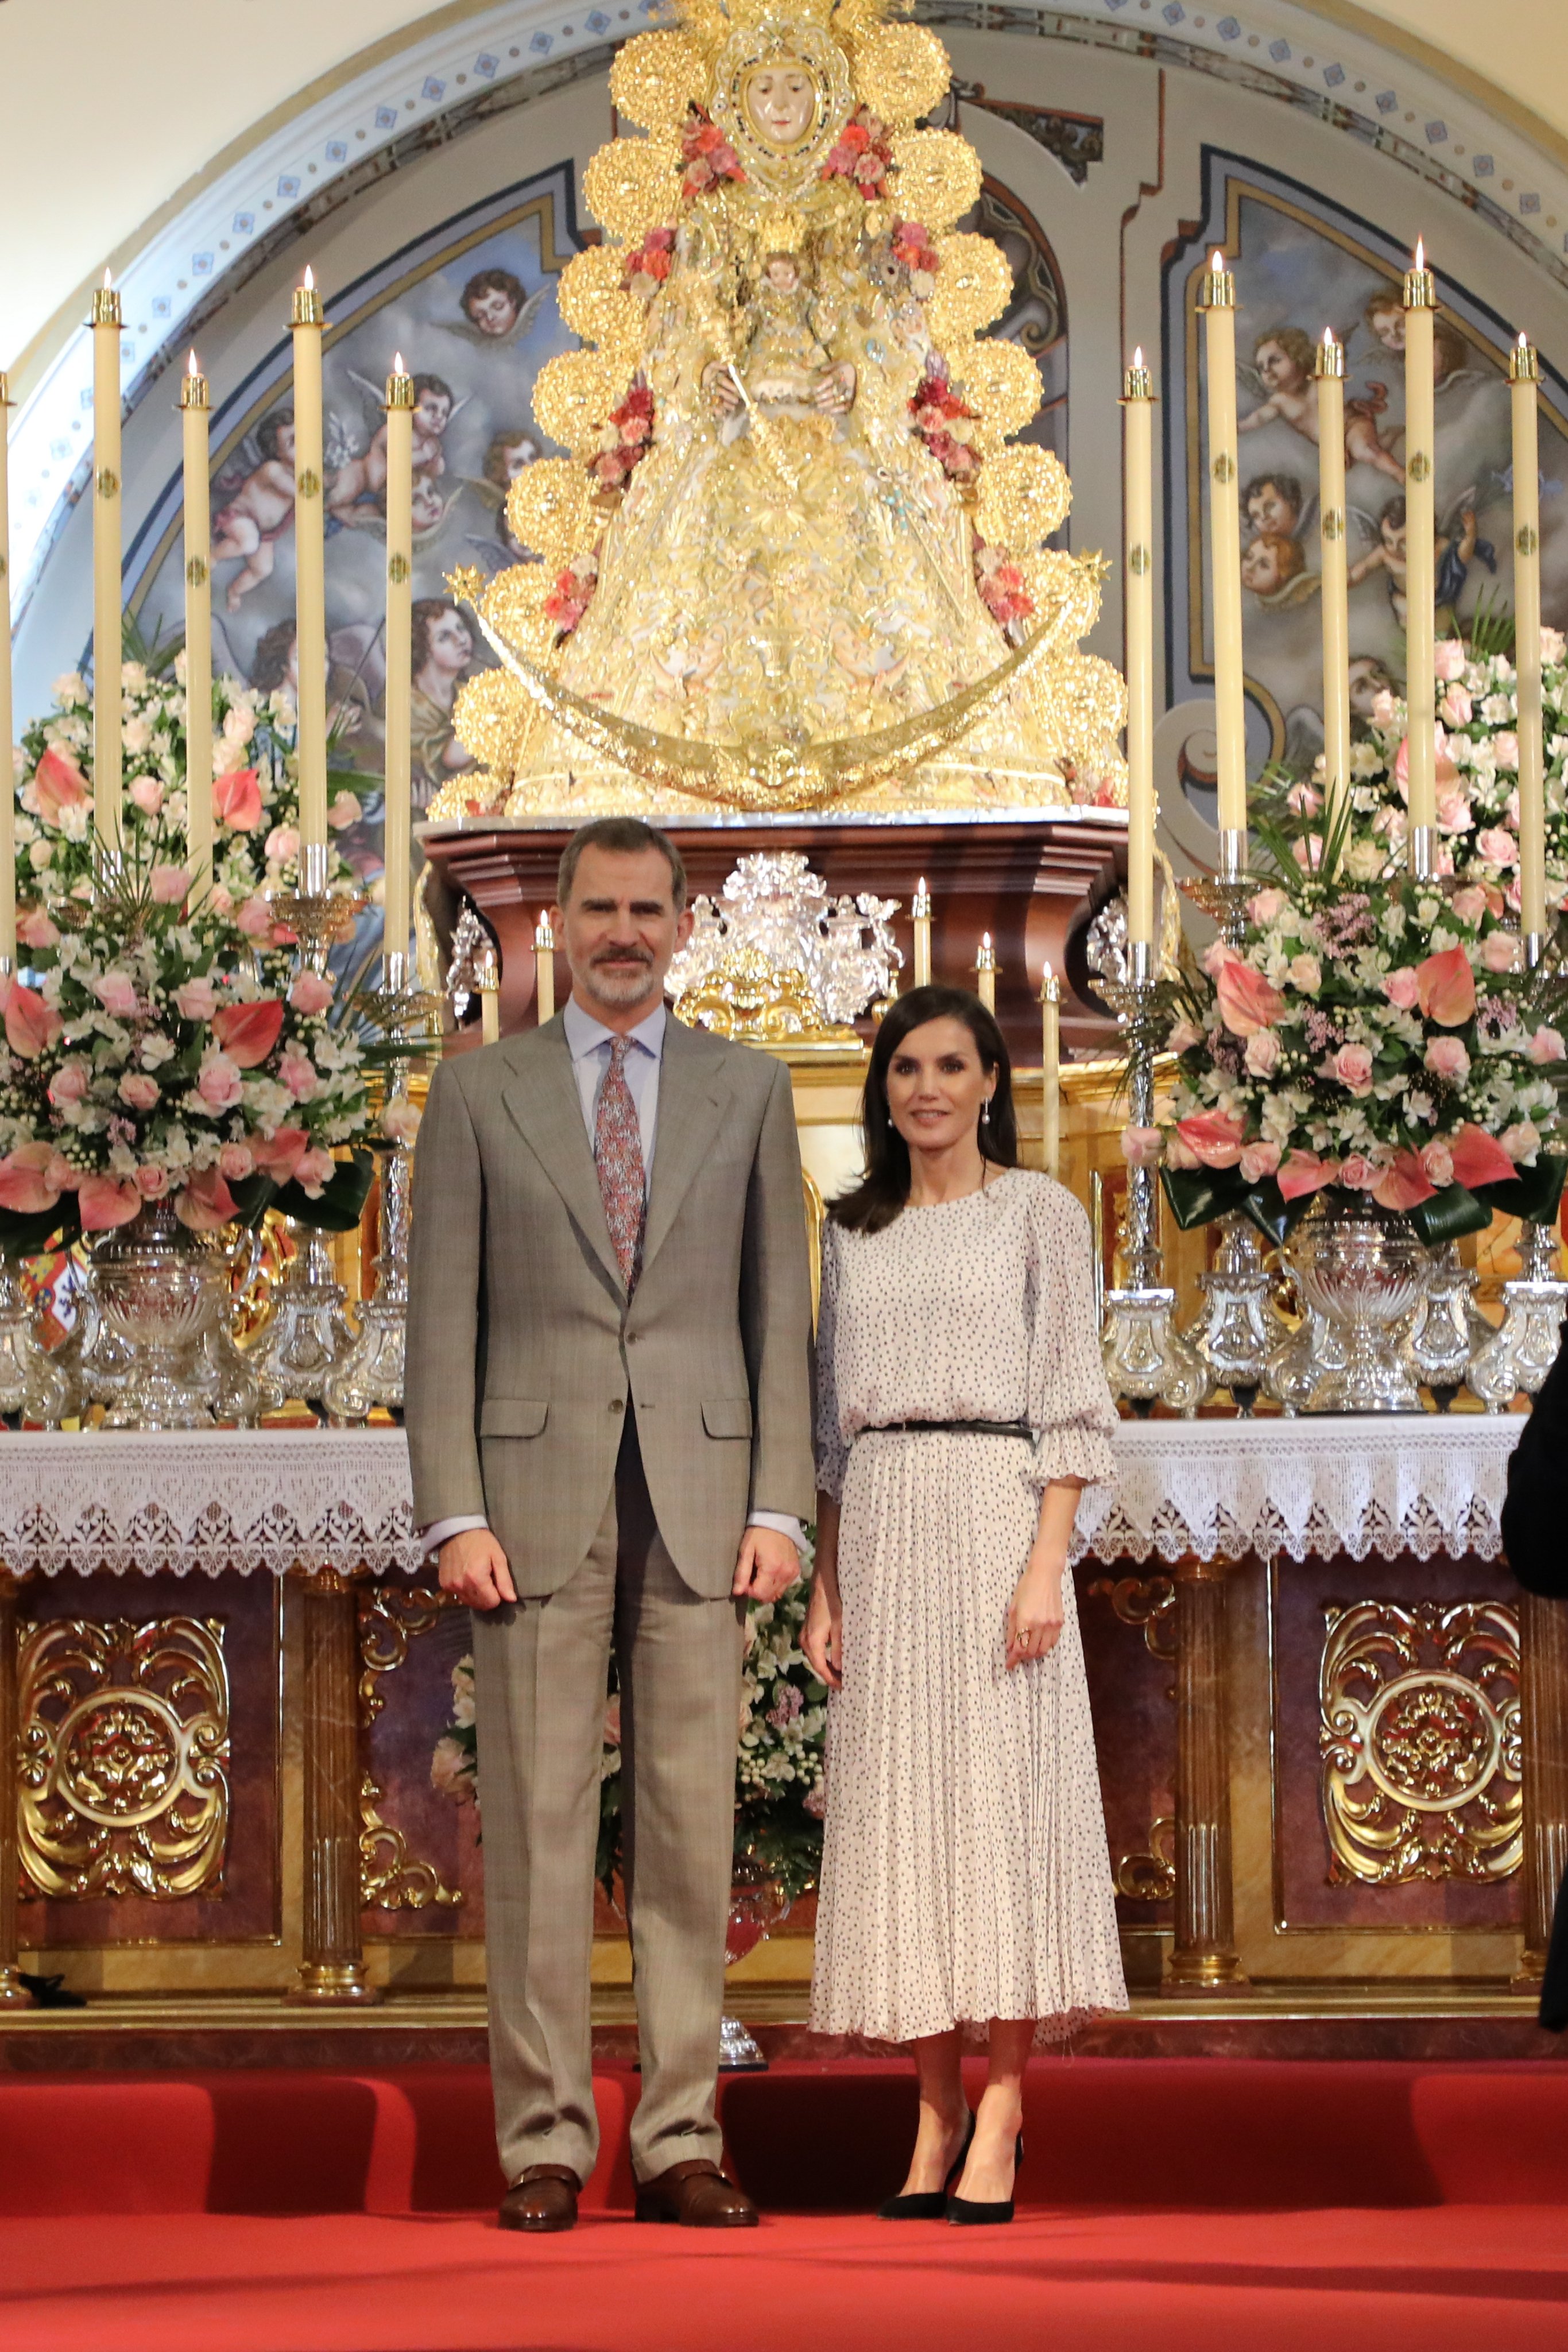 King Felipe VI and Queen Letizia after visiting the parish of Nuestra Senora De La Asuncion on the Marian Jubillee Year of Rocio Almonte (Huelva) event during their to Almonte on Febraury 14, 2020 in Almonte, Spain. | Source: Getty Images